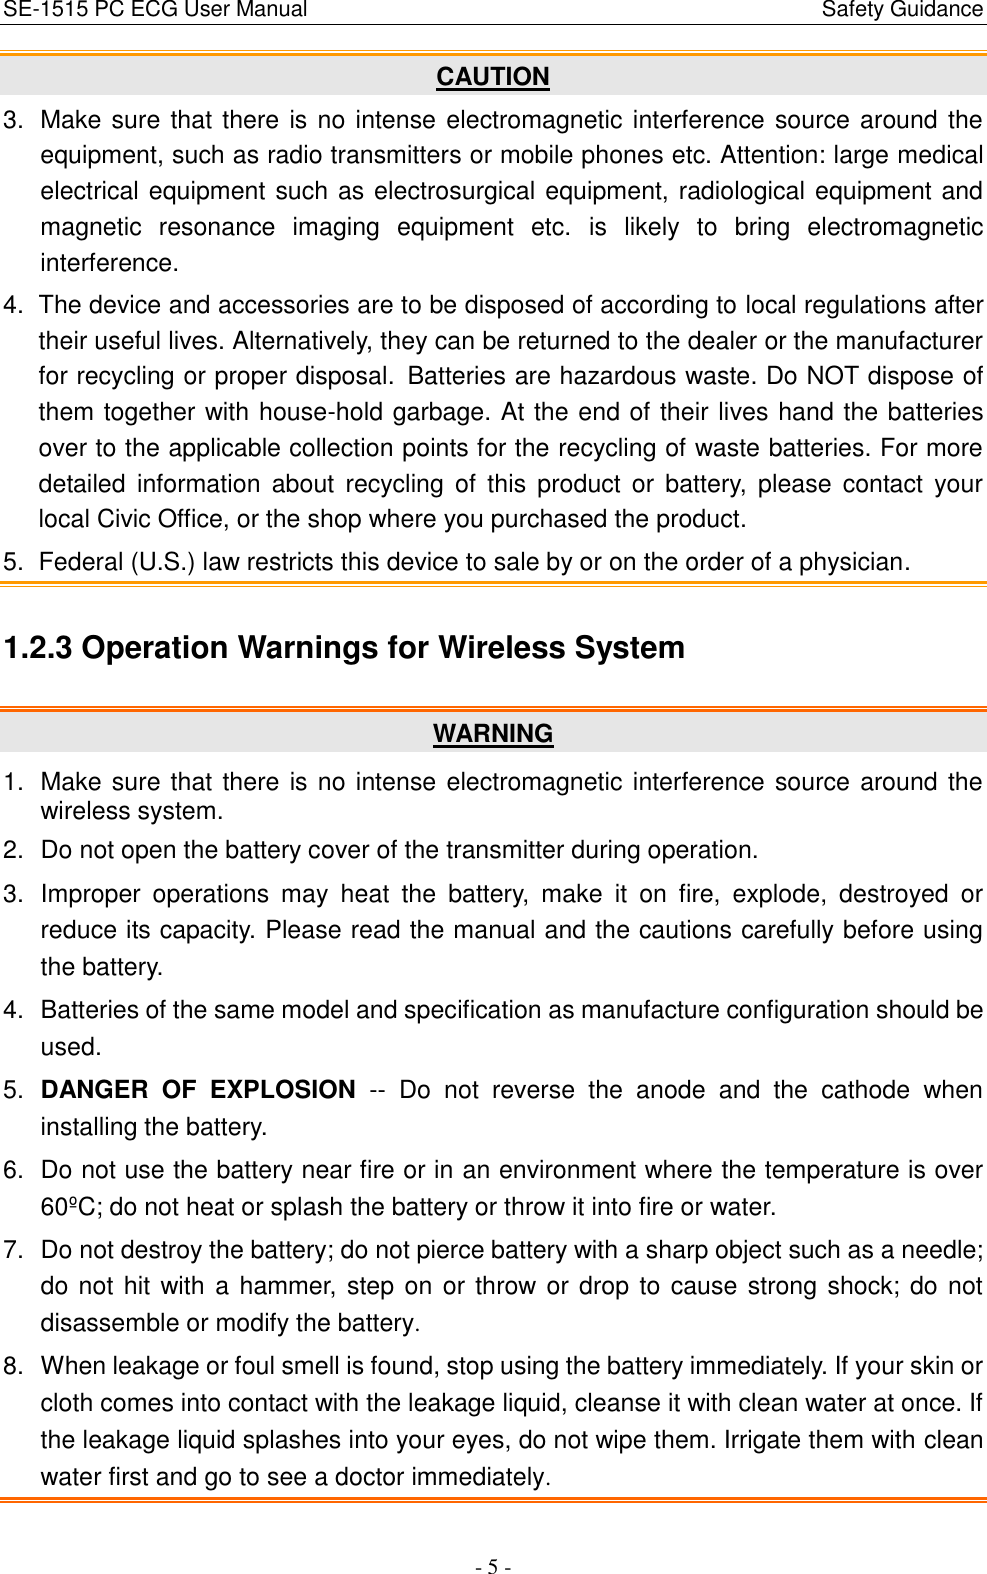 SE-1515 PC ECG User Manual                                                                                            Safety Guidance - 5 - CAUTION 3.  Make sure that there is no intense electromagnetic interference source around the equipment, such as radio transmitters or mobile phones etc. Attention: large medical electrical equipment such as electrosurgical equipment, radiological equipment and magnetic  resonance  imaging  equipment  etc.  is  likely  to  bring  electromagnetic interference. 4.  The device and accessories are to be disposed of according to local regulations after their useful lives. Alternatively, they can be returned to the dealer or the manufacturer for recycling or proper disposal. Batteries are hazardous waste. Do NOT dispose of them together with house-hold garbage. At the end of their lives hand the batteries over to the applicable collection points for the recycling of waste batteries. For more detailed  information  about  recycling of  this  product  or  battery,  please  contact  your local Civic Office, or the shop where you purchased the product. 5.  Federal (U.S.) law restricts this device to sale by or on the order of a physician. 1.2.3 Operation Warnings for Wireless System WARNING 1.  Make sure that there is no intense electromagnetic interference source around the wireless system. 2.  Do not open the battery cover of the transmitter during operation. 3.  Improper  operations  may  heat  the  battery,  make  it  on  fire,  explode,  destroyed  or reduce its capacity. Please read the manual and the cautions carefully before using the battery. 4.  Batteries of the same model and specification as manufacture configuration should be used. 5. DANGER  OF  EXPLOSION --  Do  not  reverse  the  anode  and  the  cathode  when installing the battery. 6. Do not use the battery near fire or in an environment where the temperature is over 60ºC ; do not heat or splash the battery or throw it into fire or water. 7.  Do not destroy the battery; do not pierce battery with a sharp object such as a needle; do not hit with a hammer, step on or throw or drop to cause strong shock; do not disassemble or modify the battery. 8.  When leakage or foul smell is found, stop using the battery immediately. If your skin or cloth comes into contact with the leakage liquid, cleanse it with clean water at once. If the leakage liquid splashes into your eyes, do not wipe them. Irrigate them with clean water first and go to see a doctor immediately. 